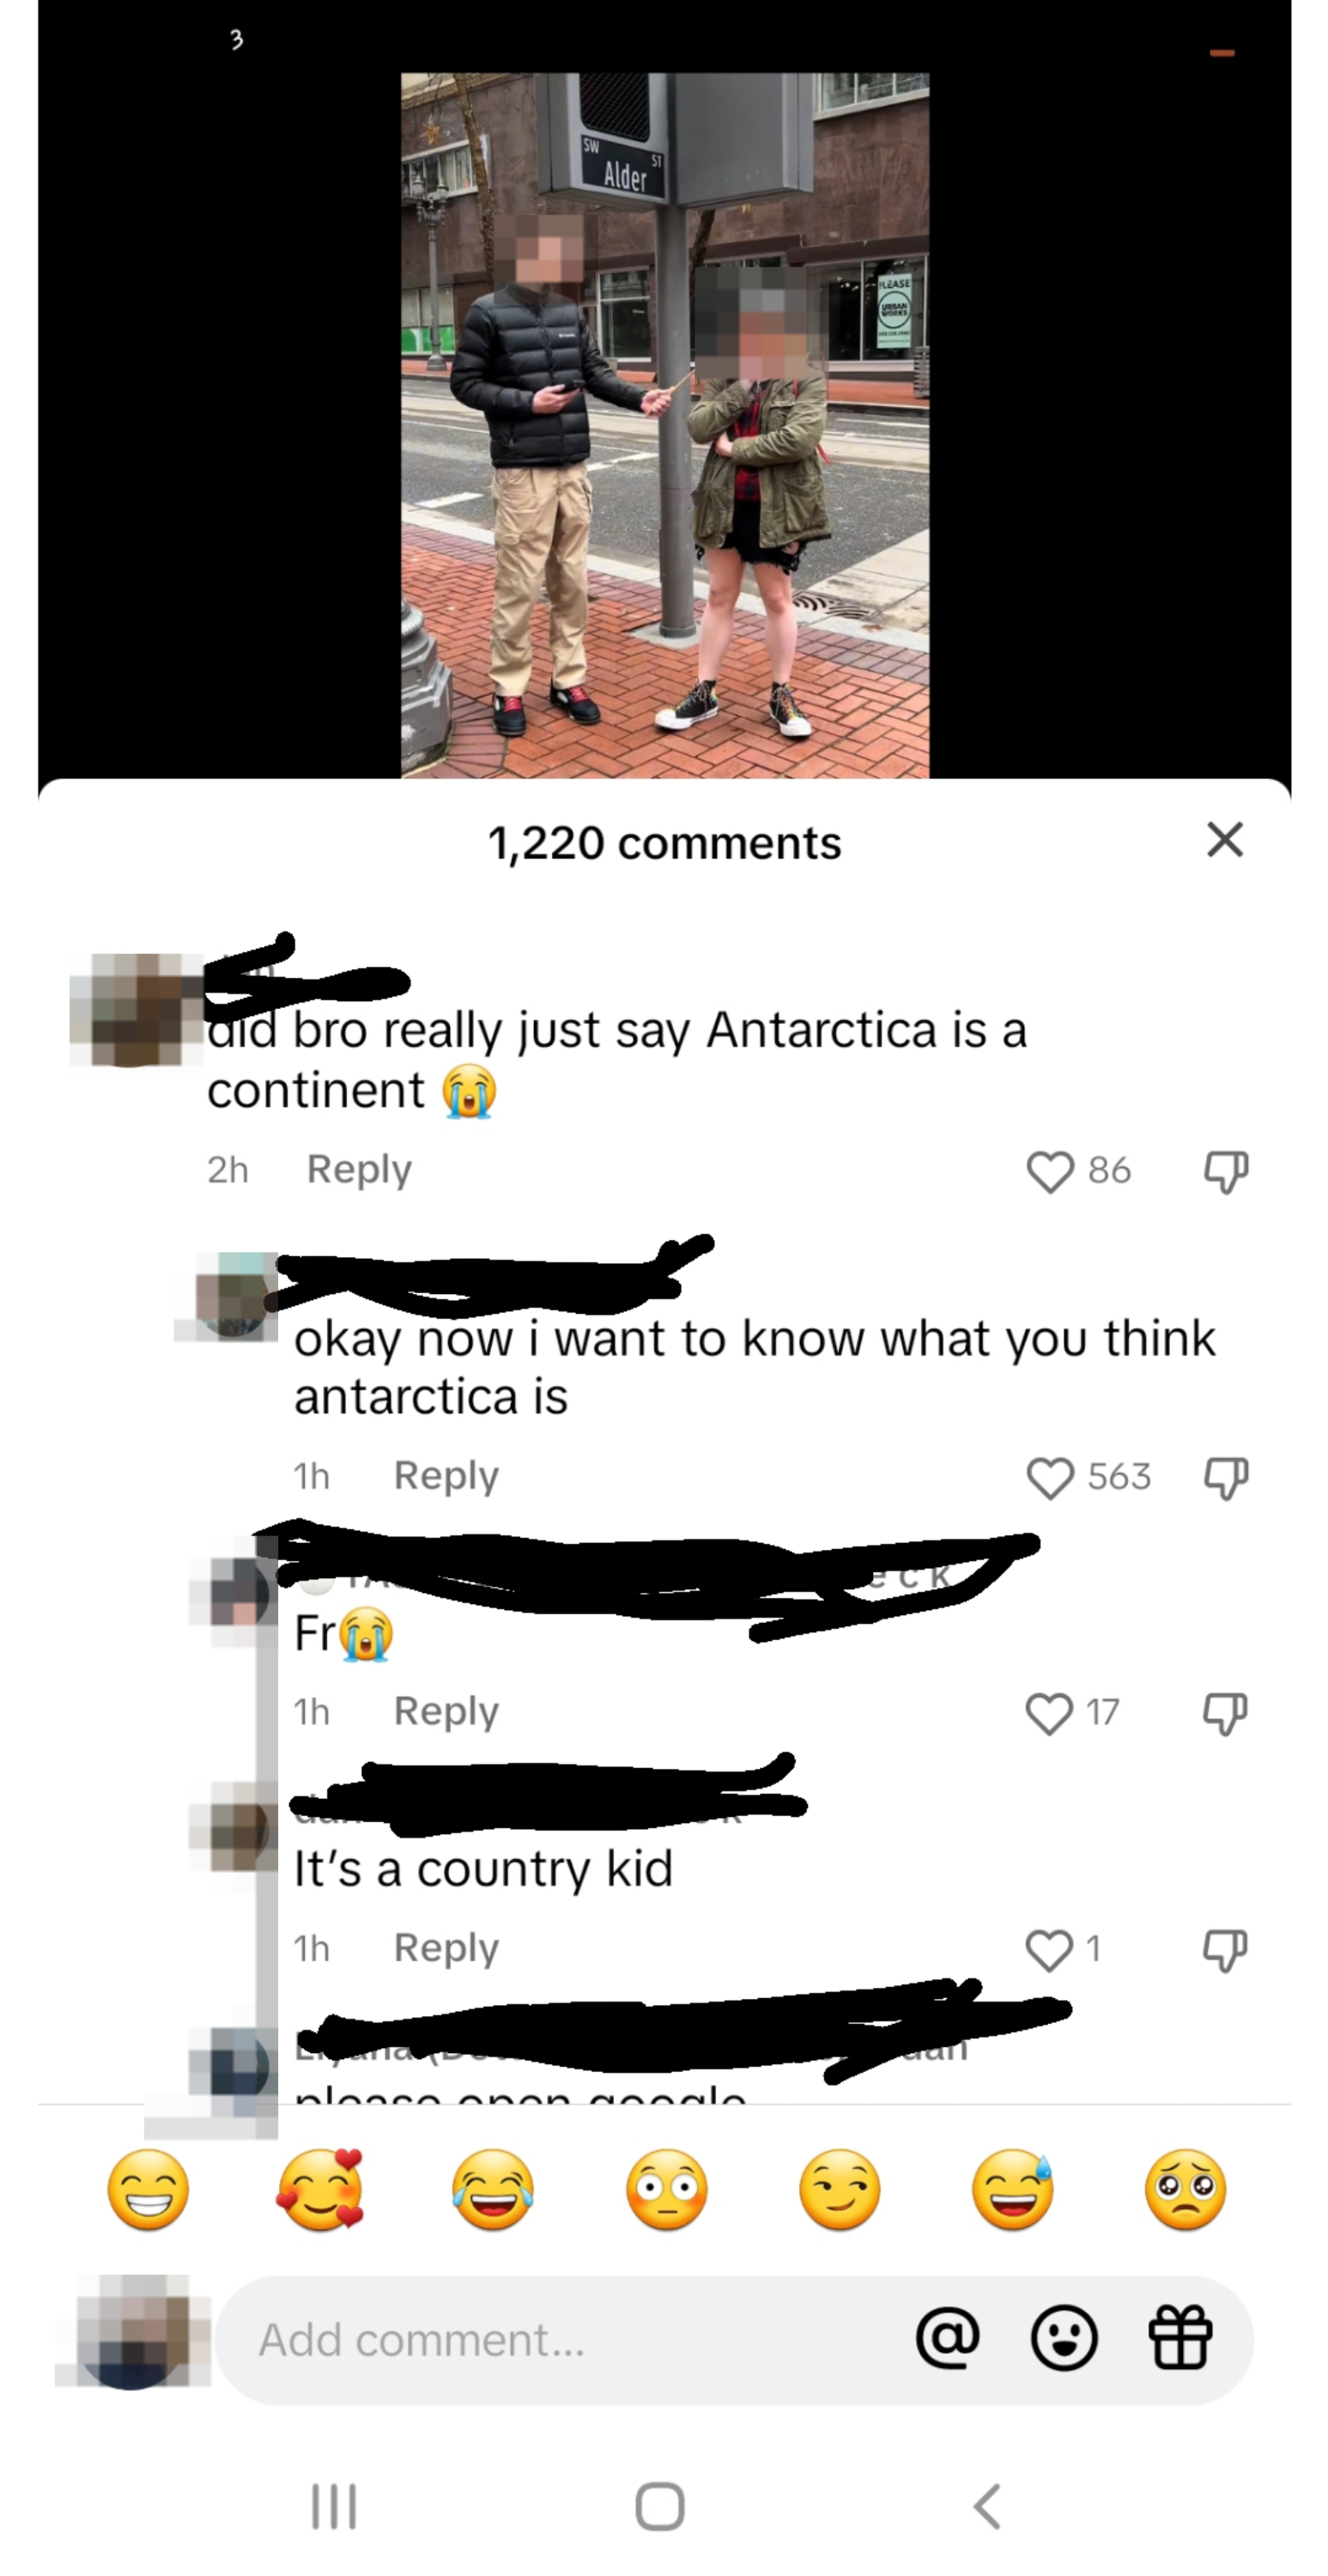 Person thinks Antarctica is a country, not a continent